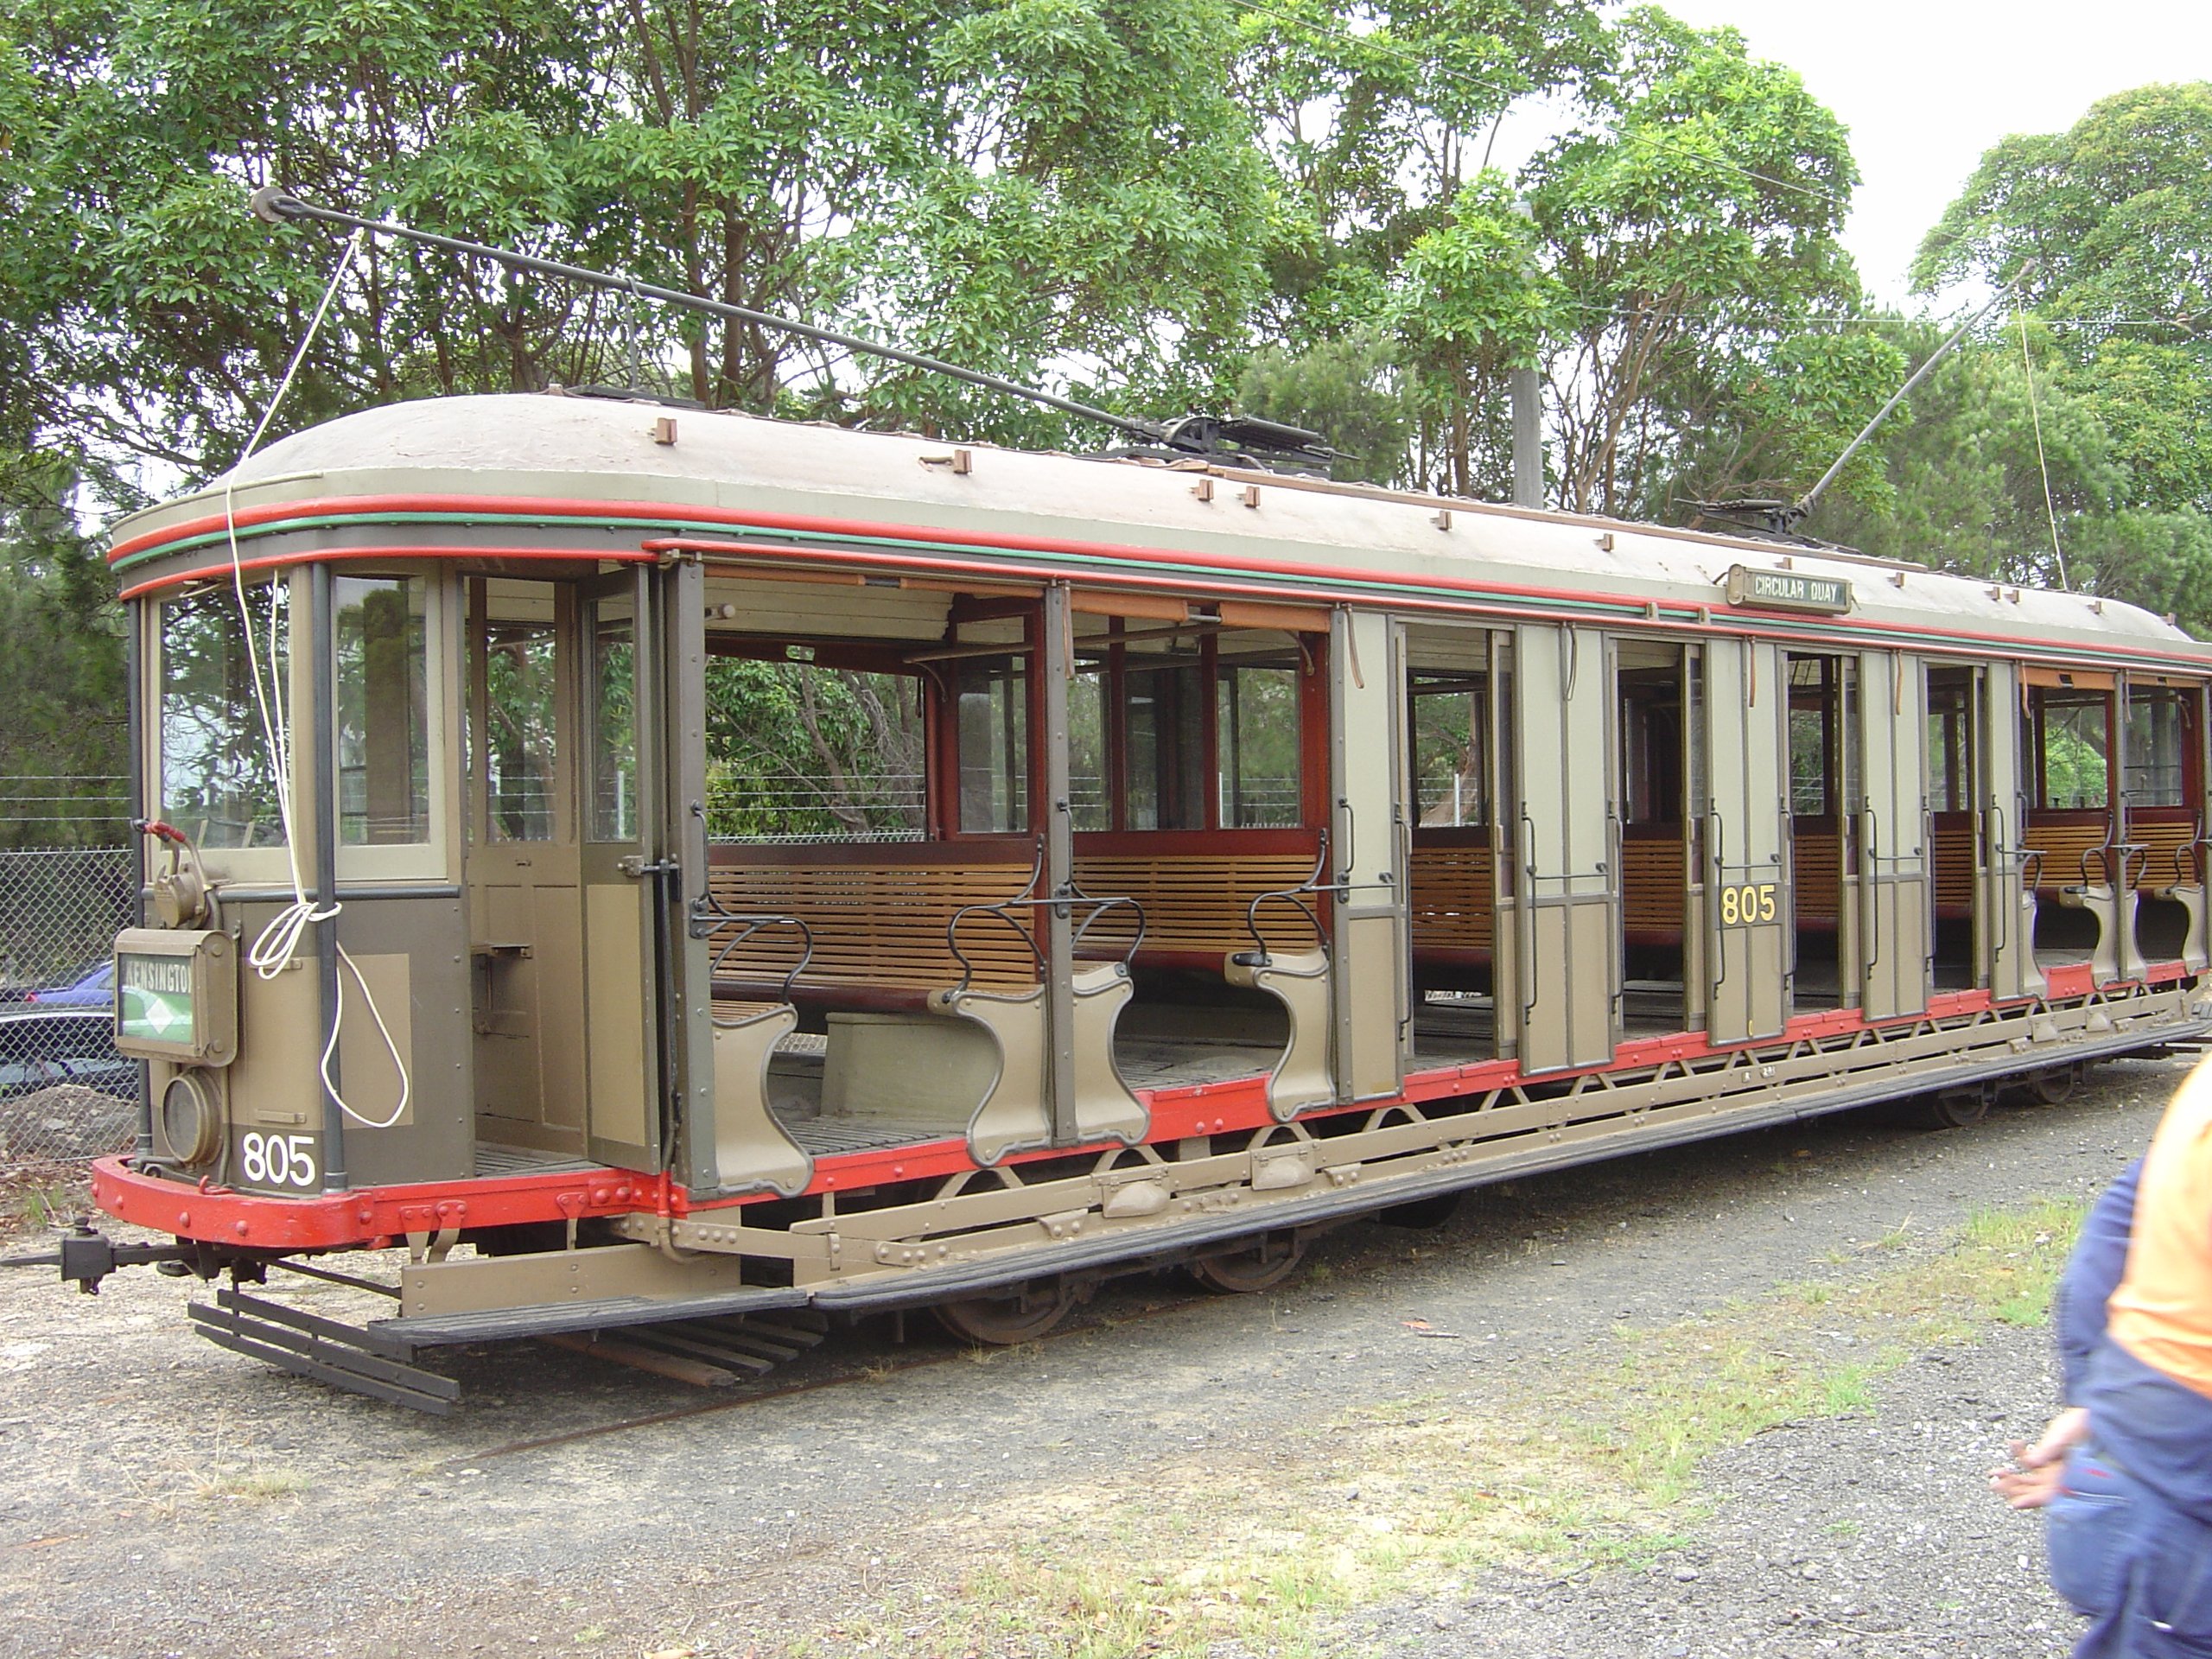 Sydney 'Toastrack' O-class tram by Meadowbank Manufacturing